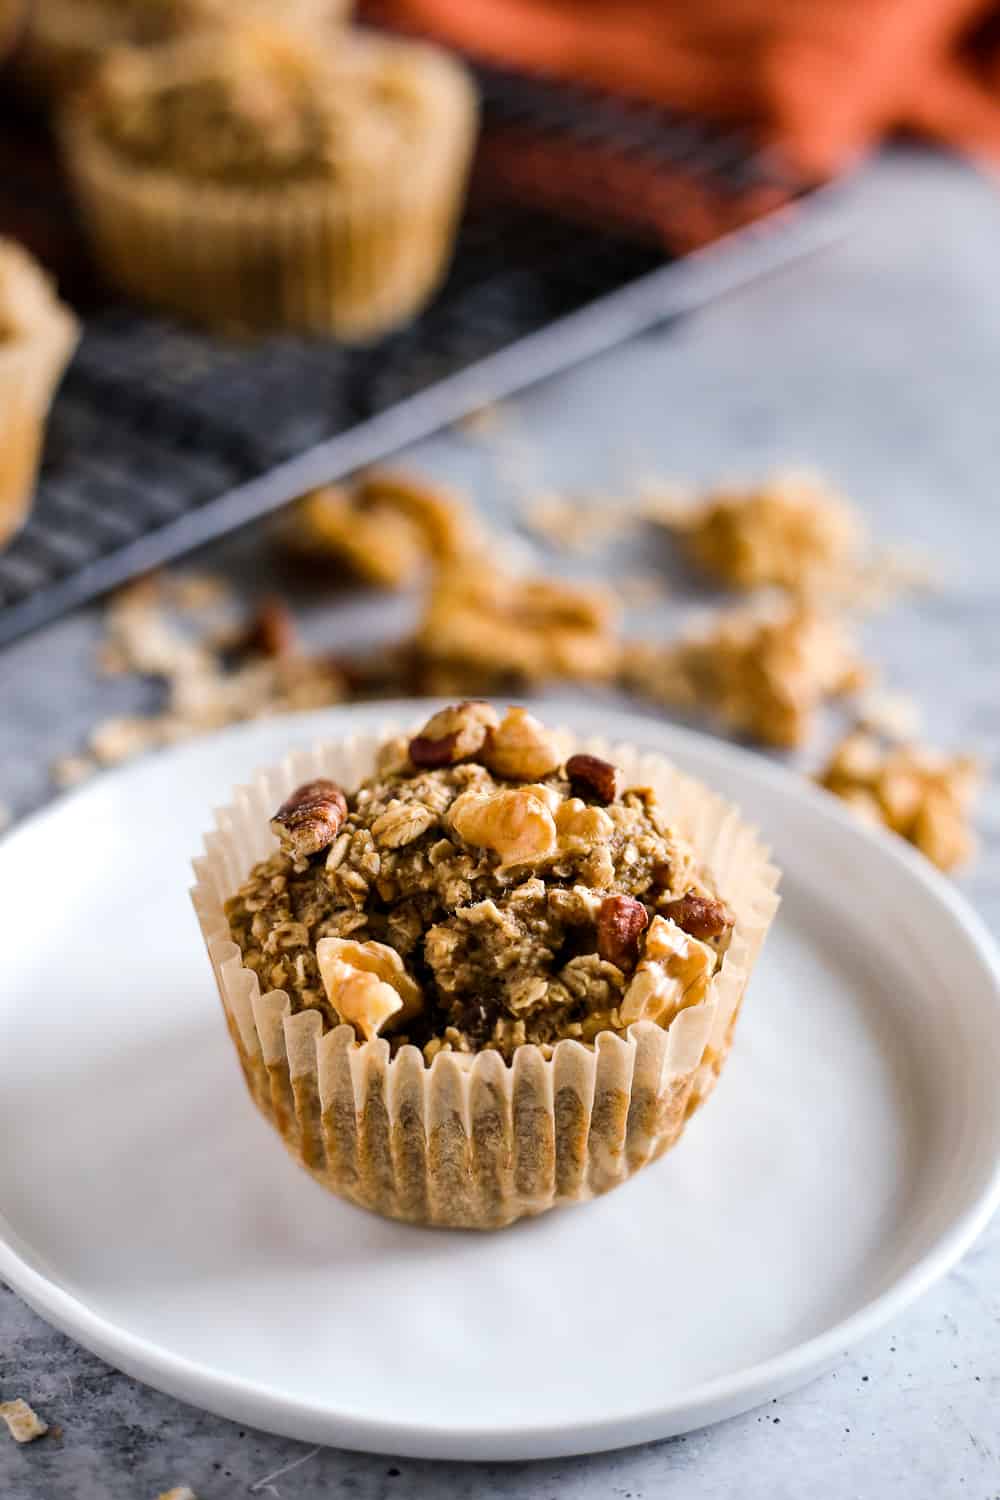 A banana nut baked oatmeal cup in a cupcake liner sits on a small white dish in front of a cooling rack with the rest of the muffins